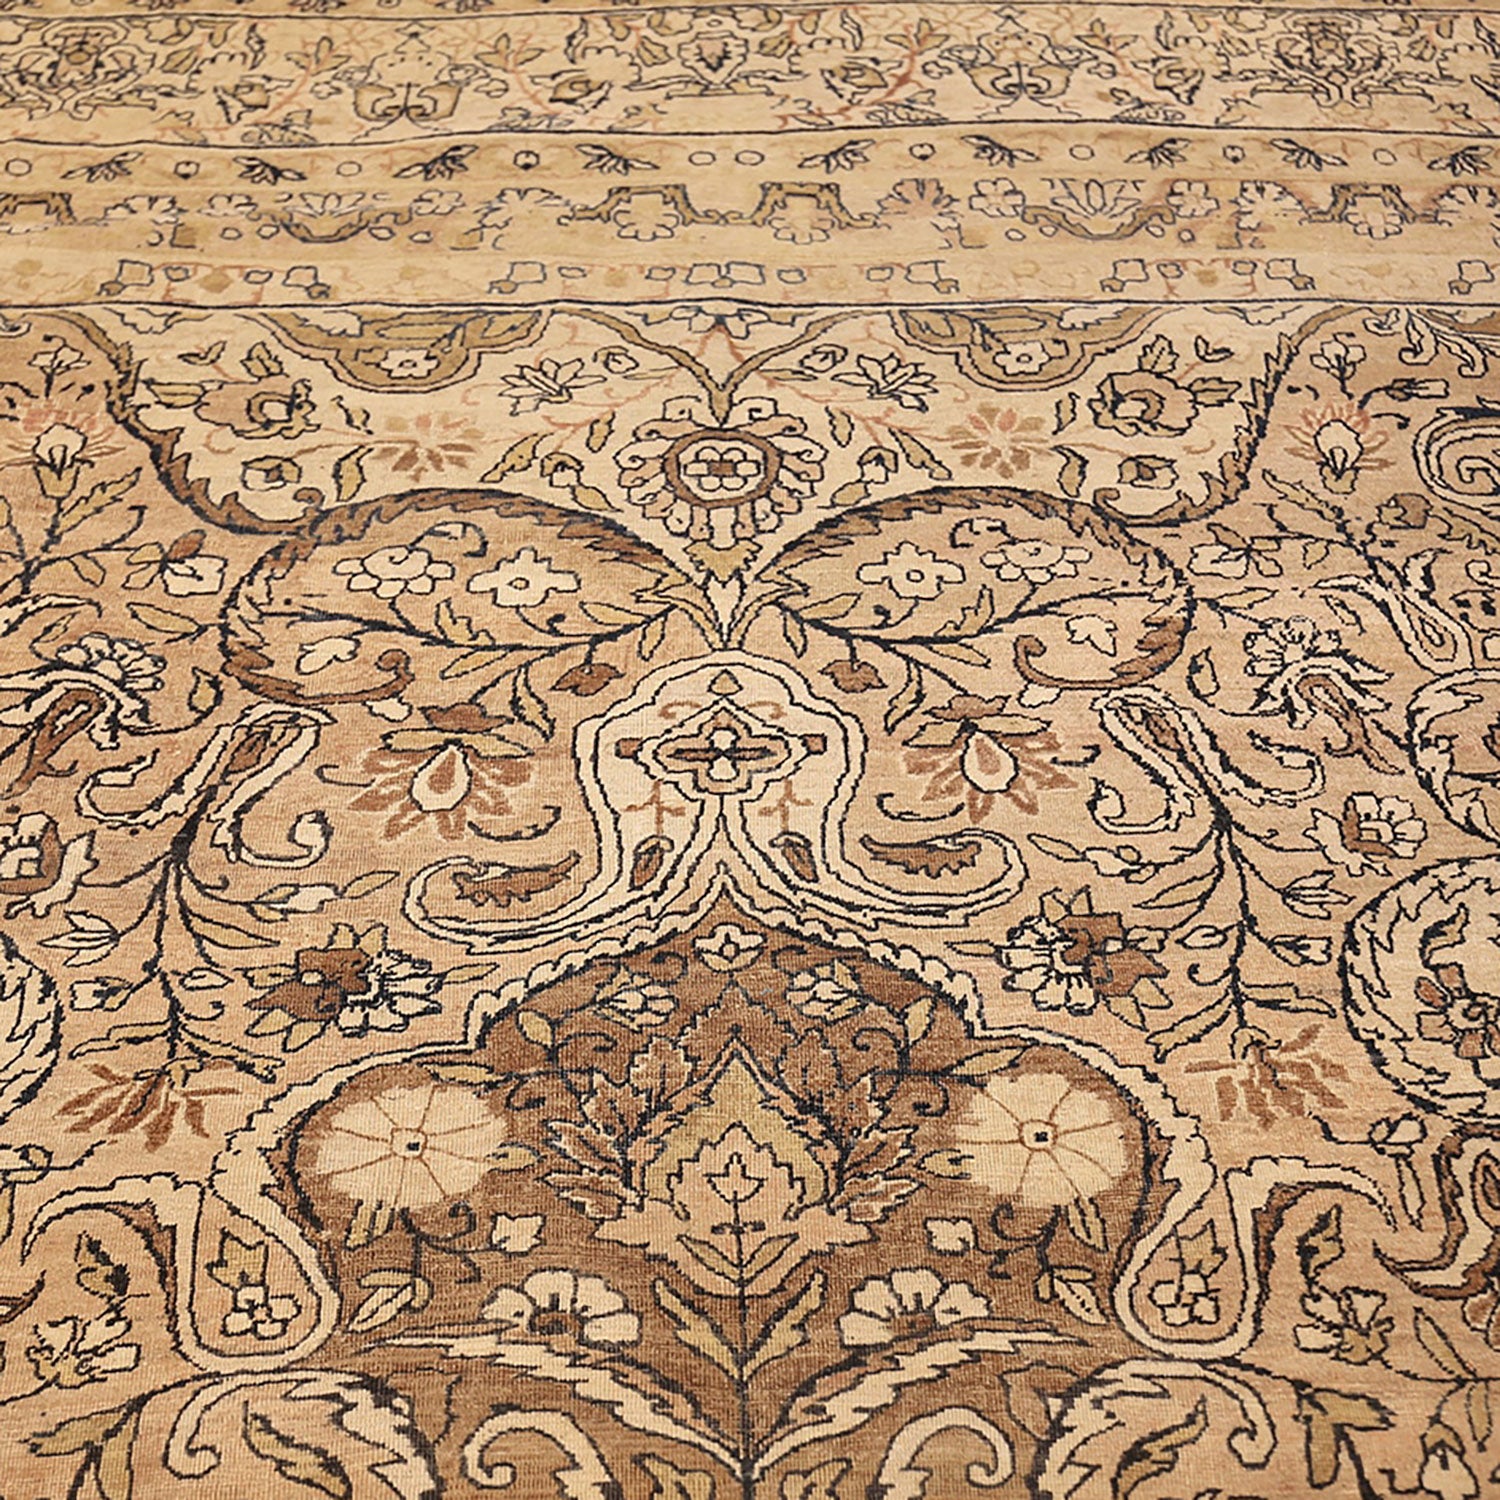 Close-up of an intricately patterned, symmetrical carpet with floral motifs.